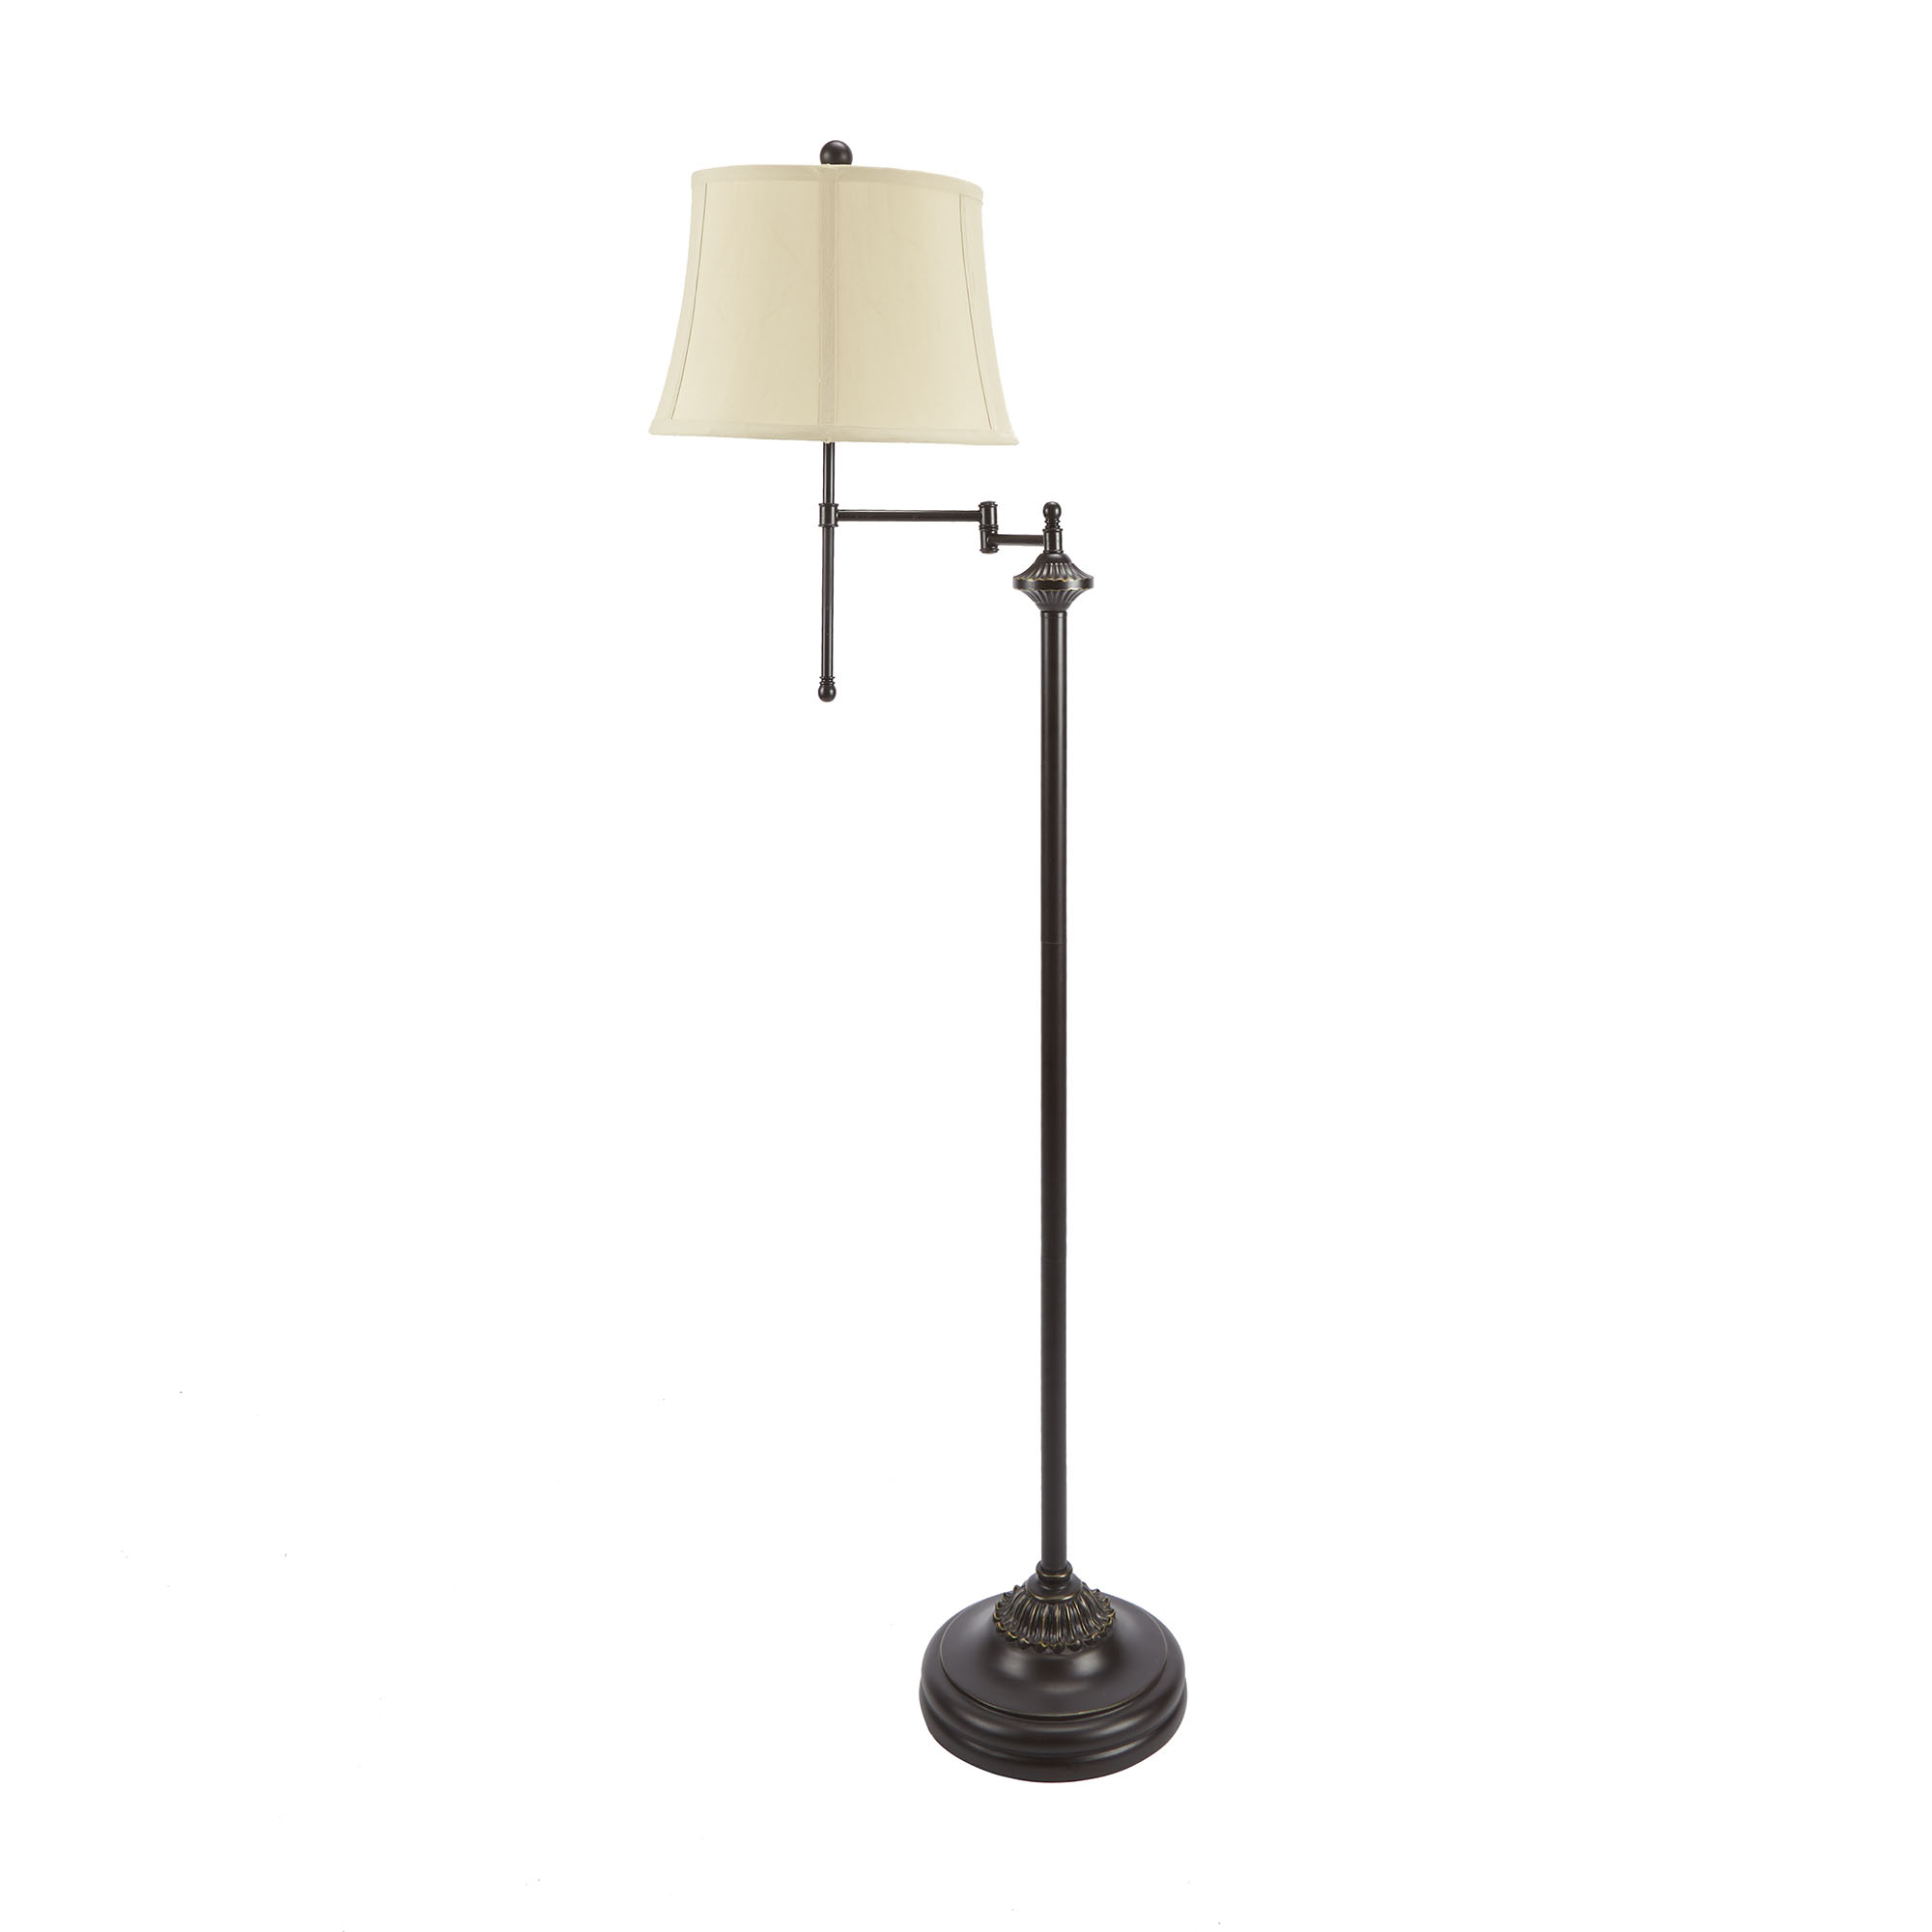 Better Homes Gardens 59 Swing Arm Floor Lamp Walmart within sizing 2000 X 2000